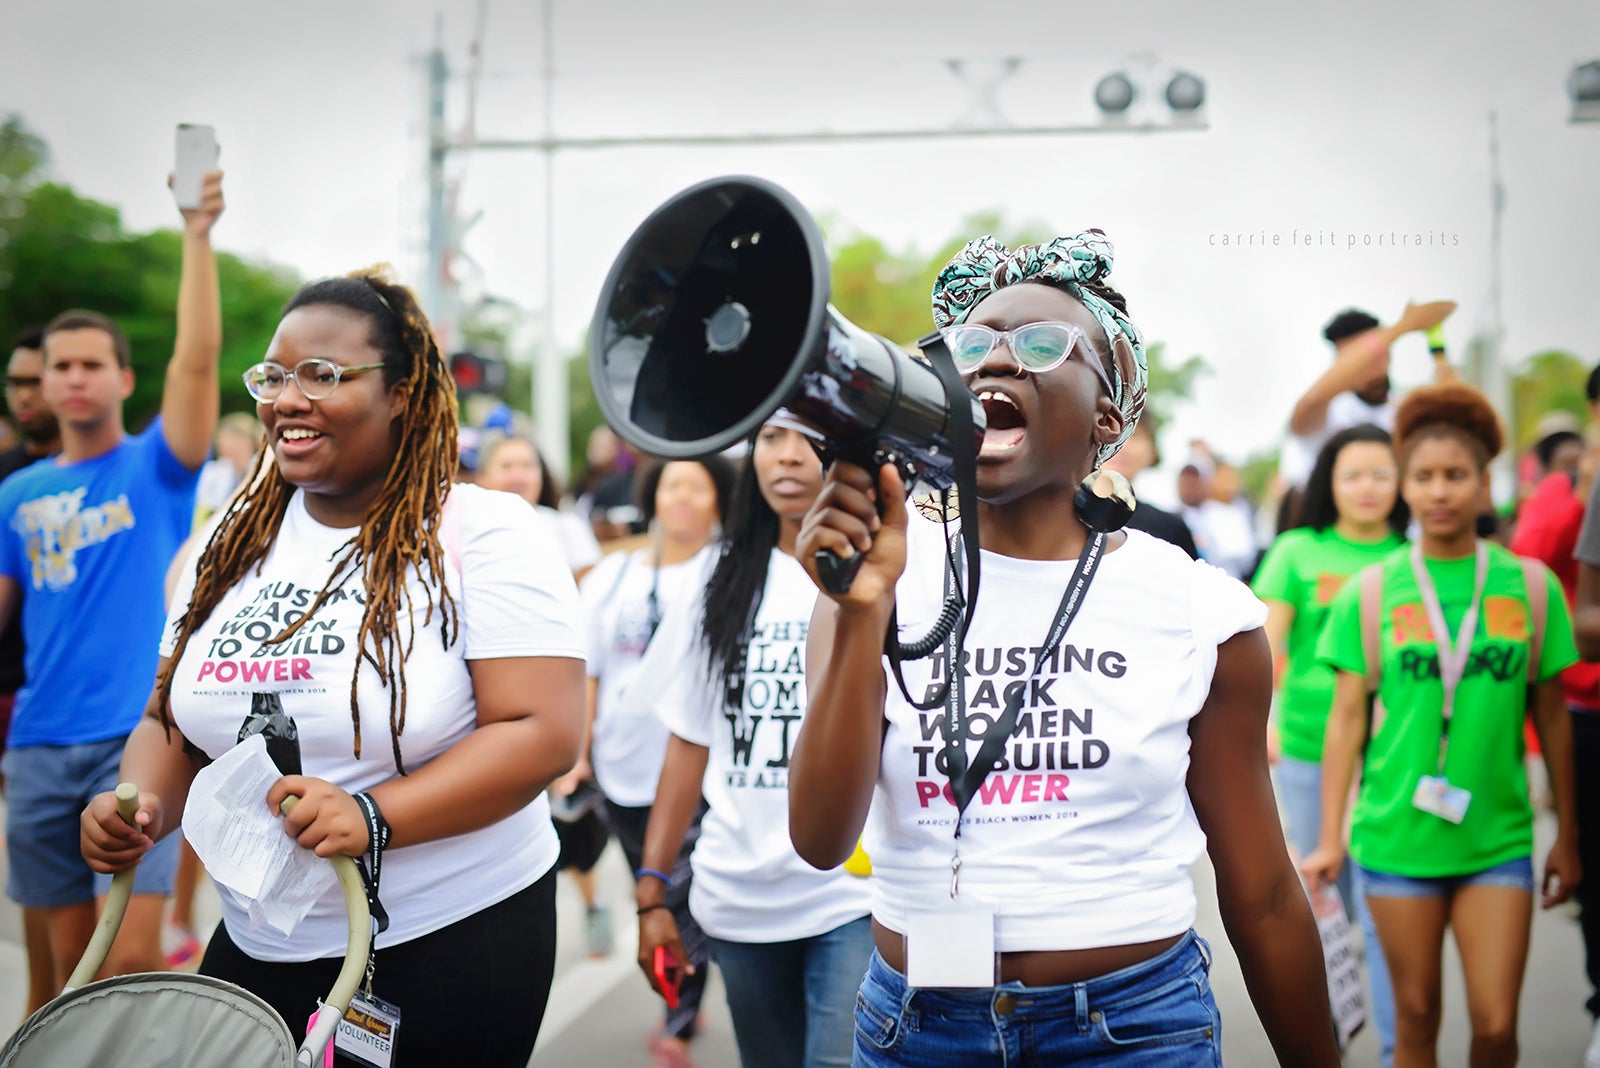 Wakumni Douglas speaking into a bullhorn while marching with others at the 2018 March for Black Women